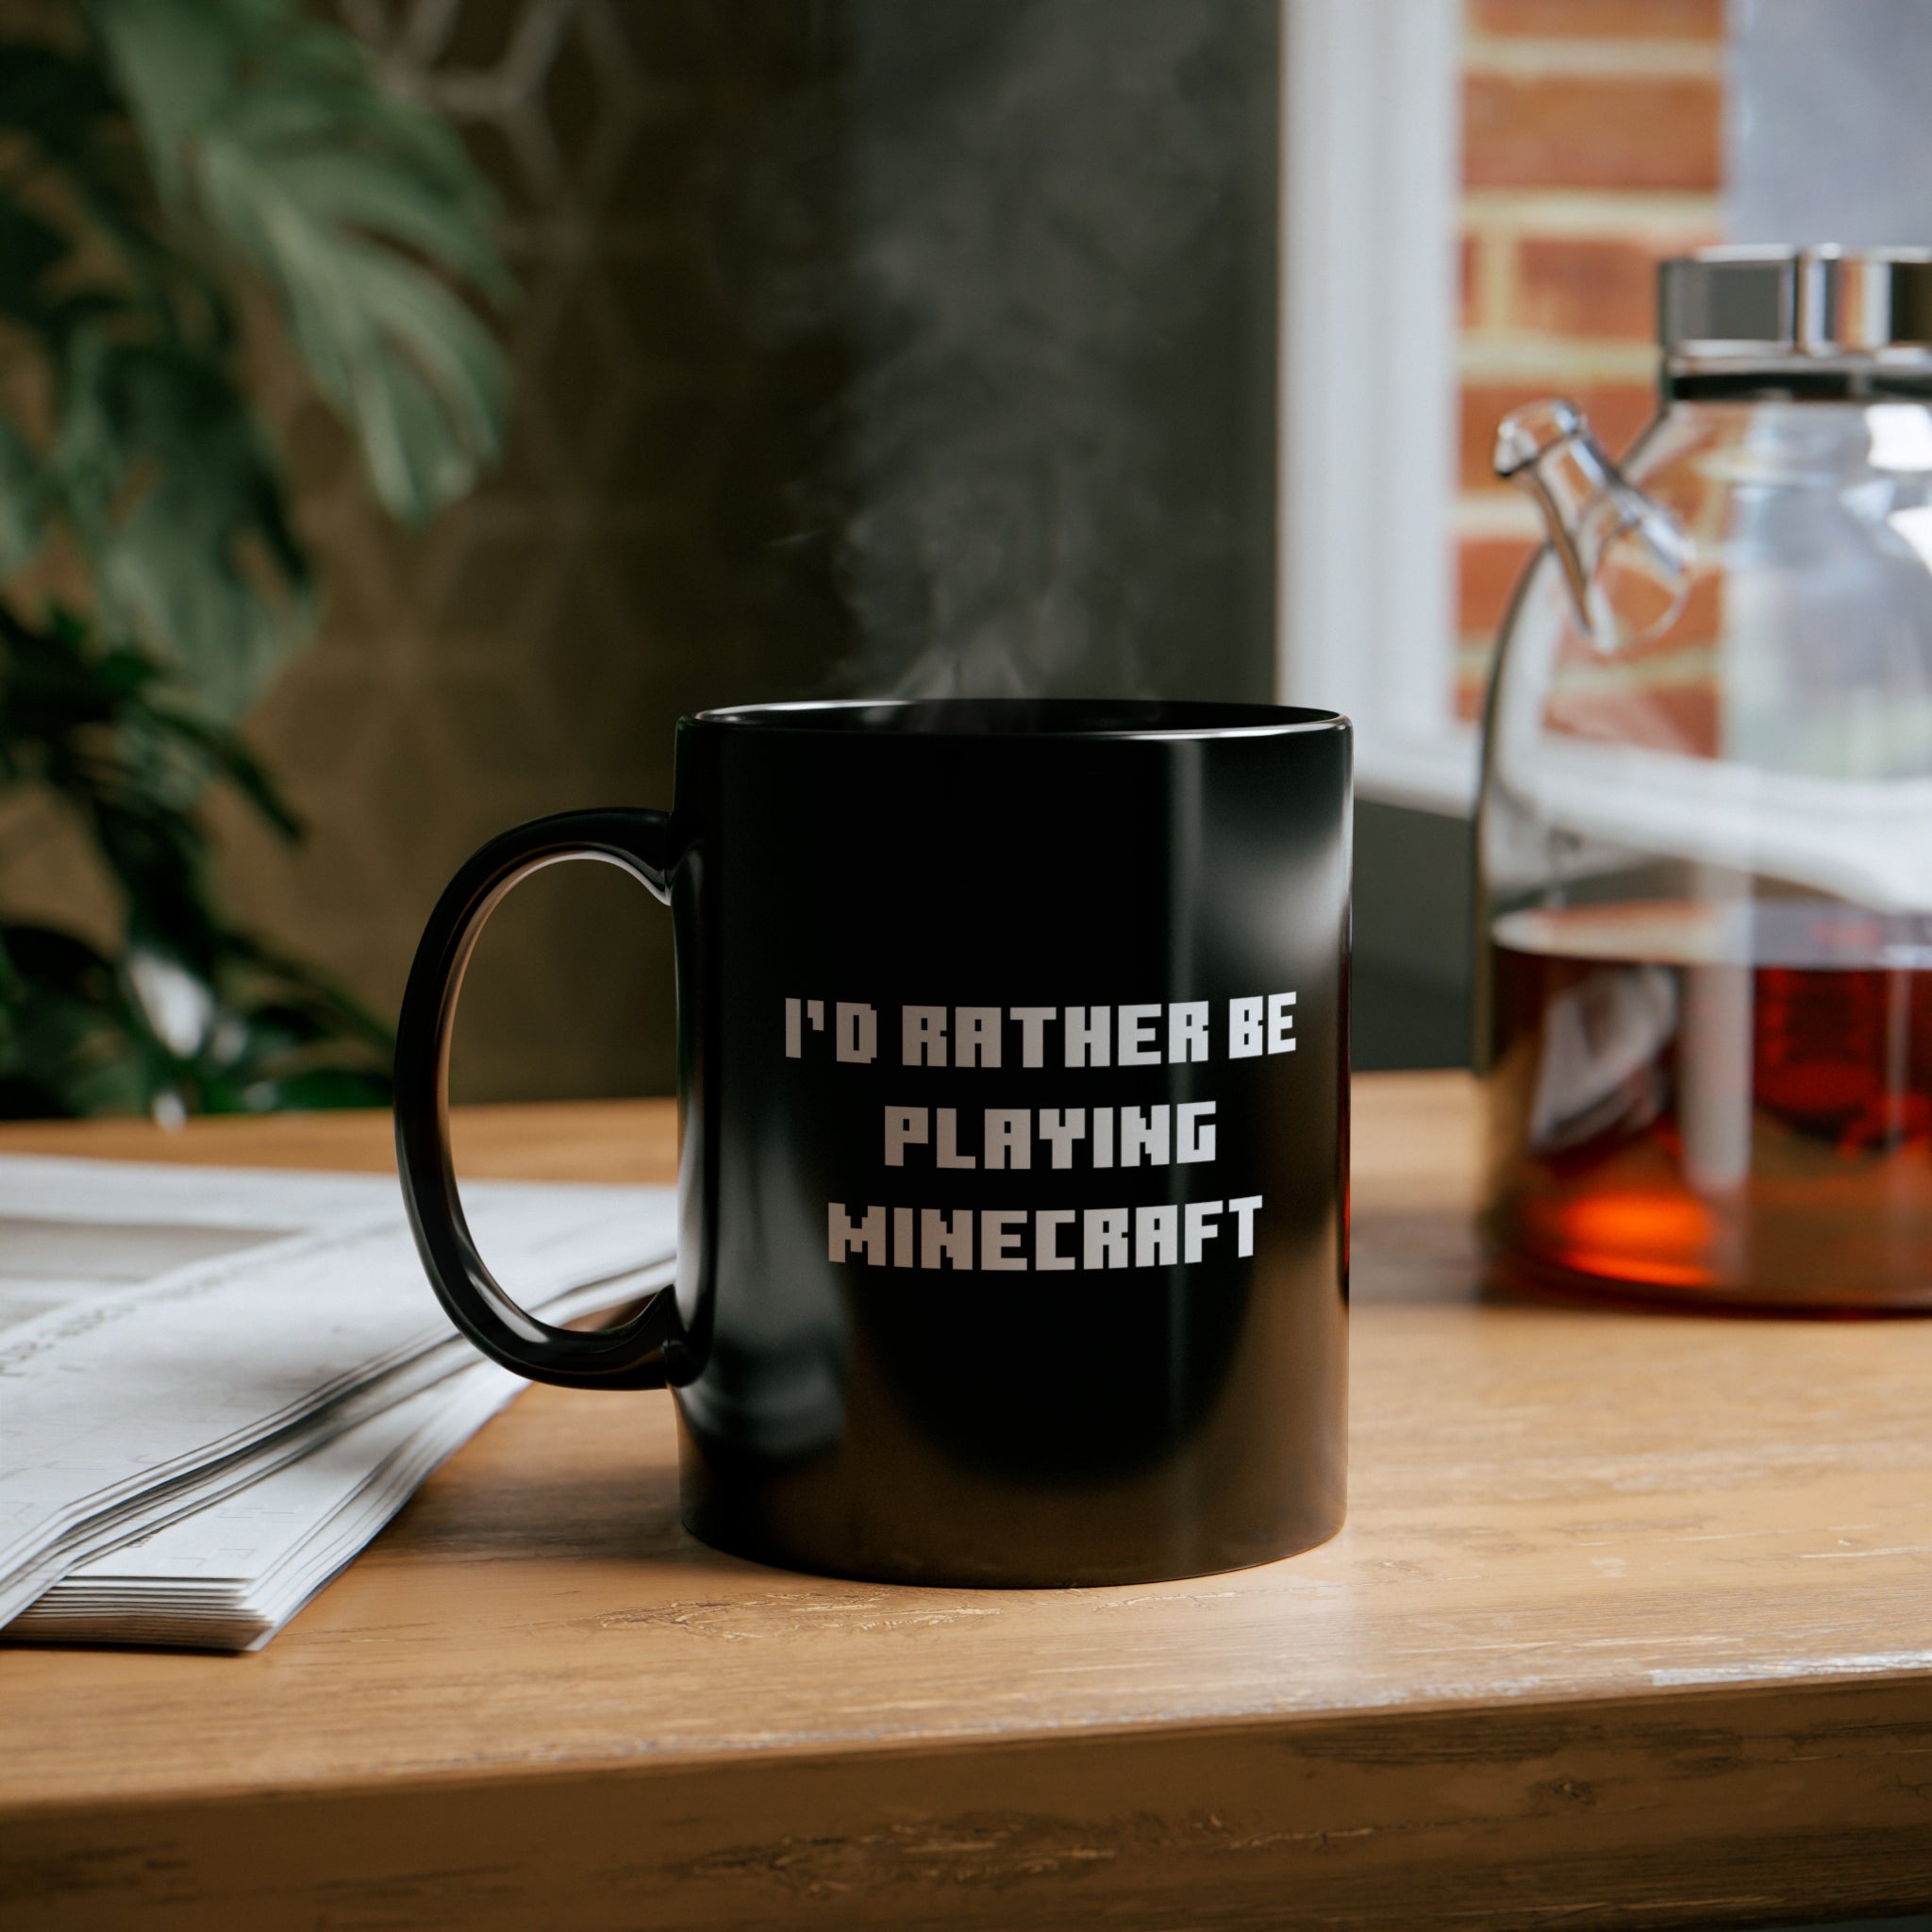 Mine craft I'd Rather Be Playing Black Mug (11oz, 15oz) Gamer Gift For Him Her Game Cup Cups Mugs Birthday Christmas Valentine's Anniversary Gifts